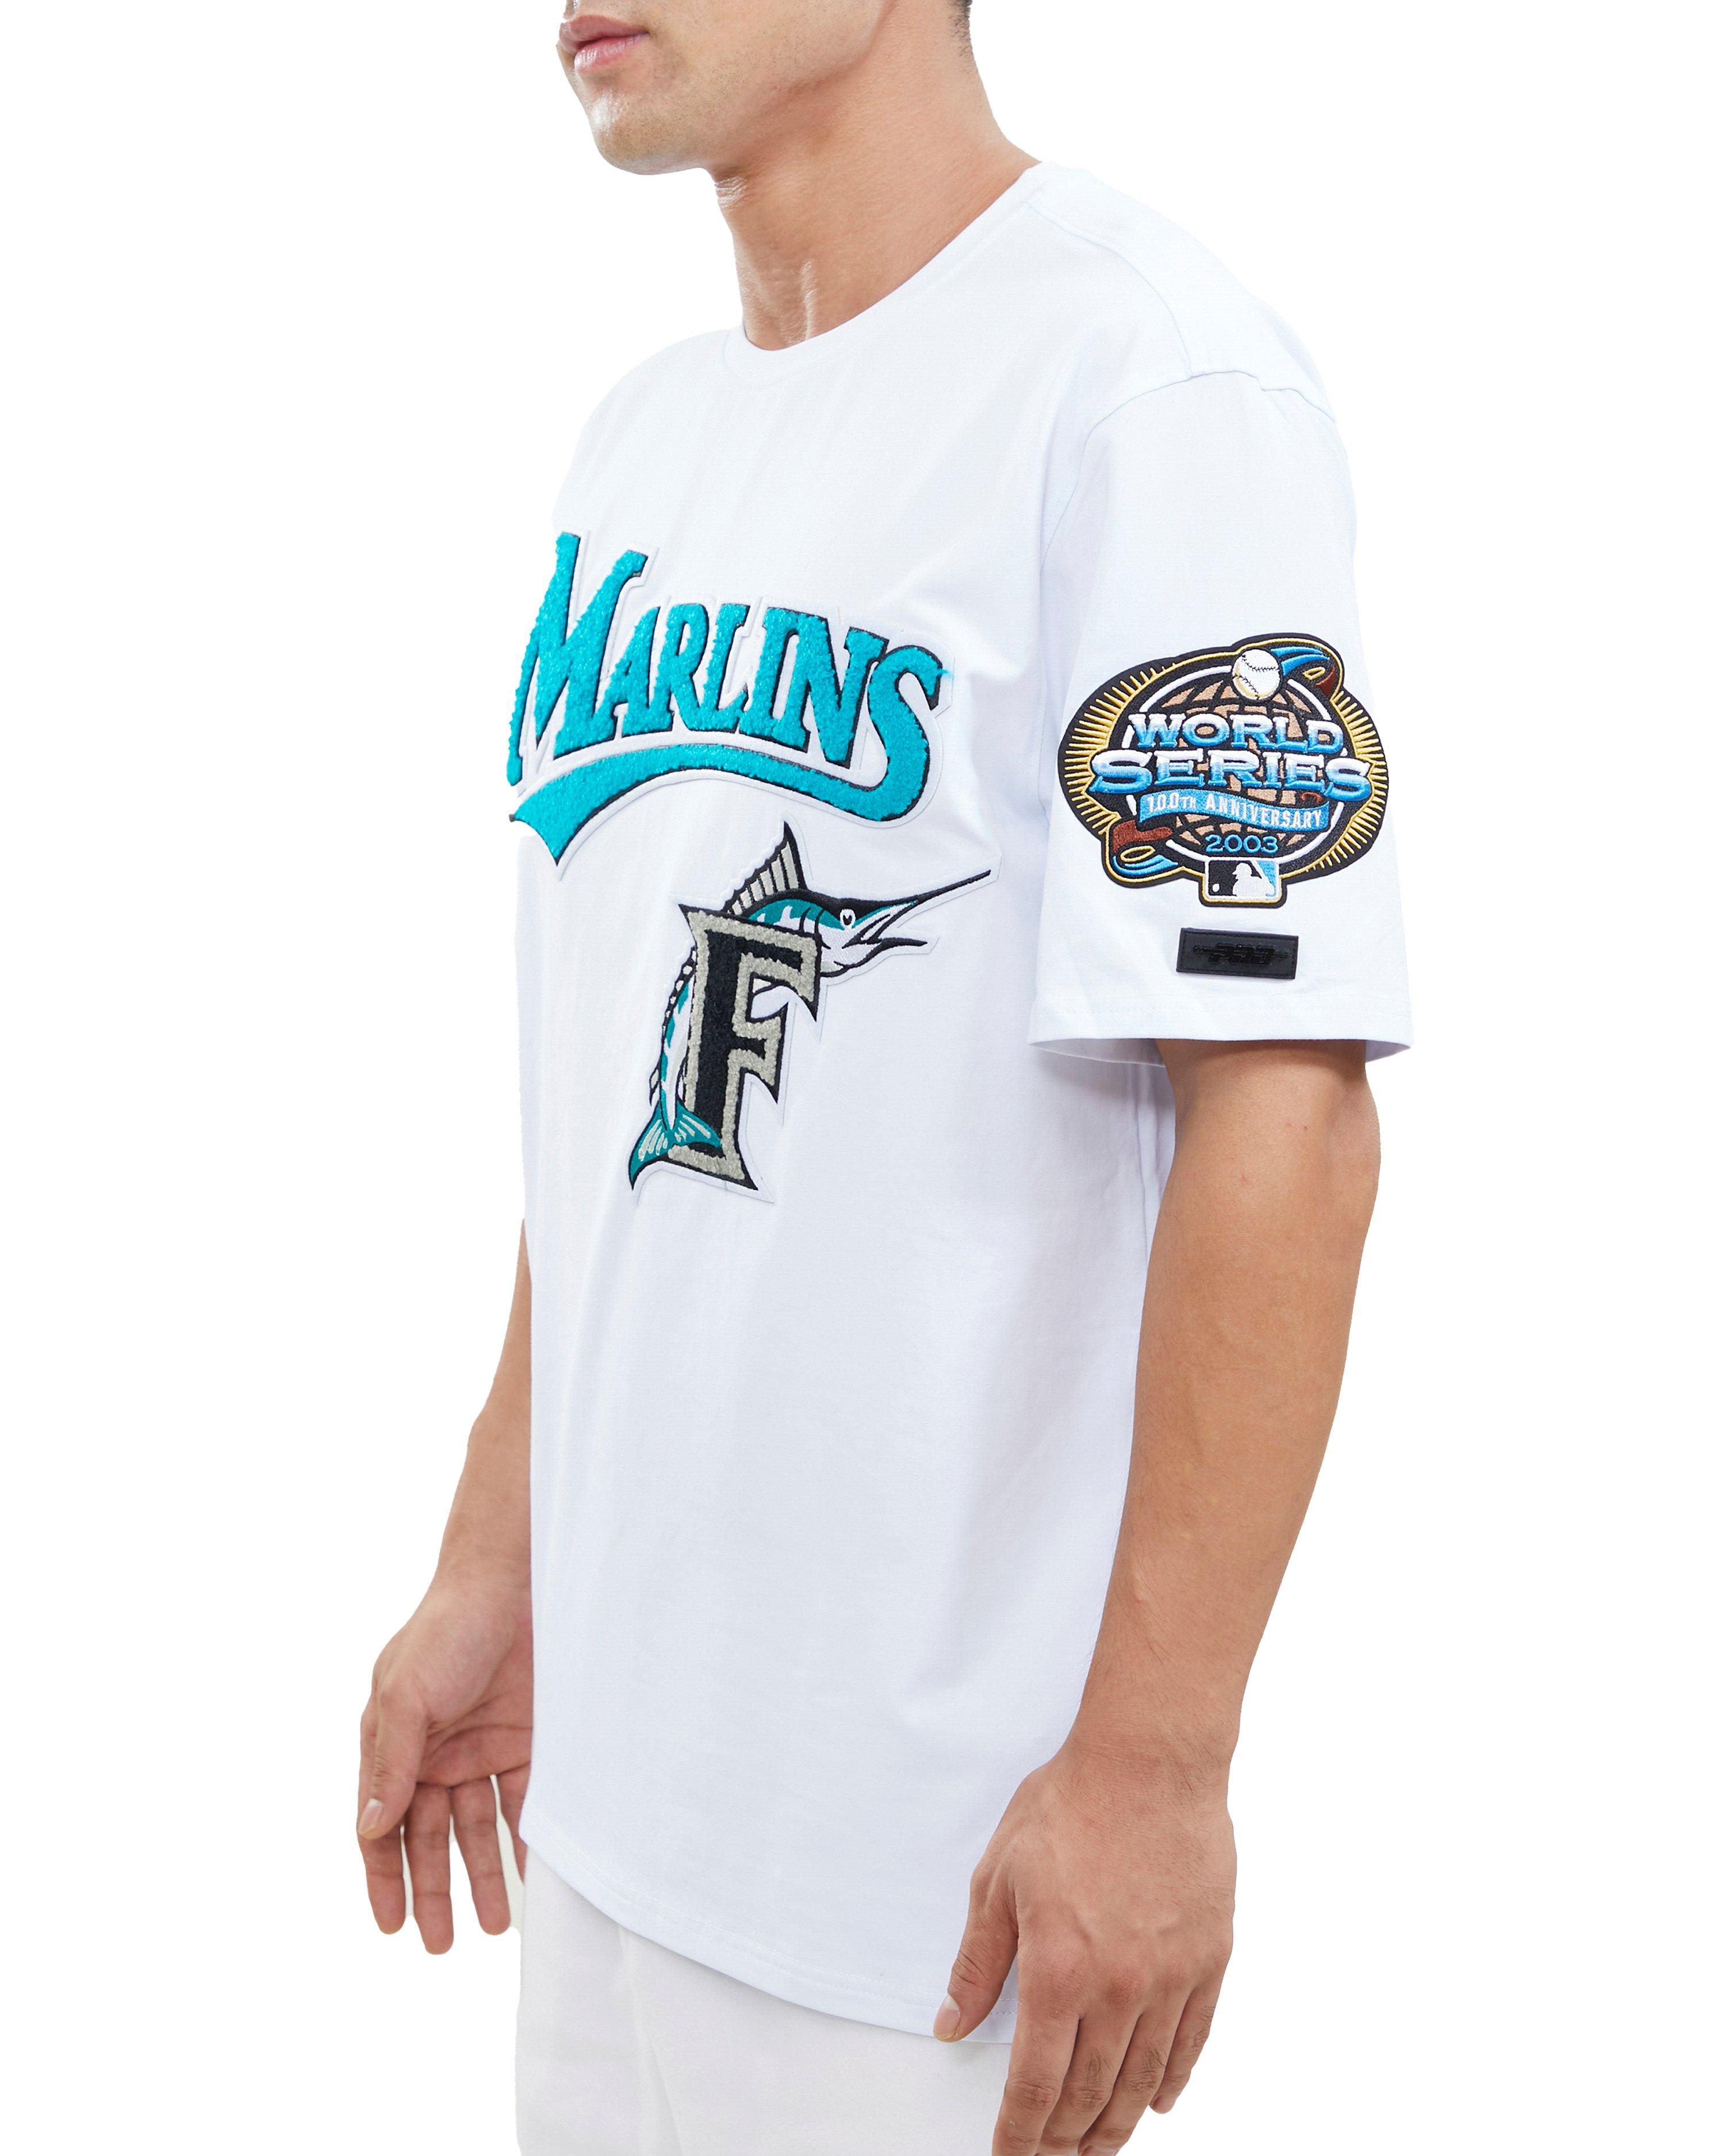 Pro Standard Men's Florida Marlins Cooperstown Patch Shorts